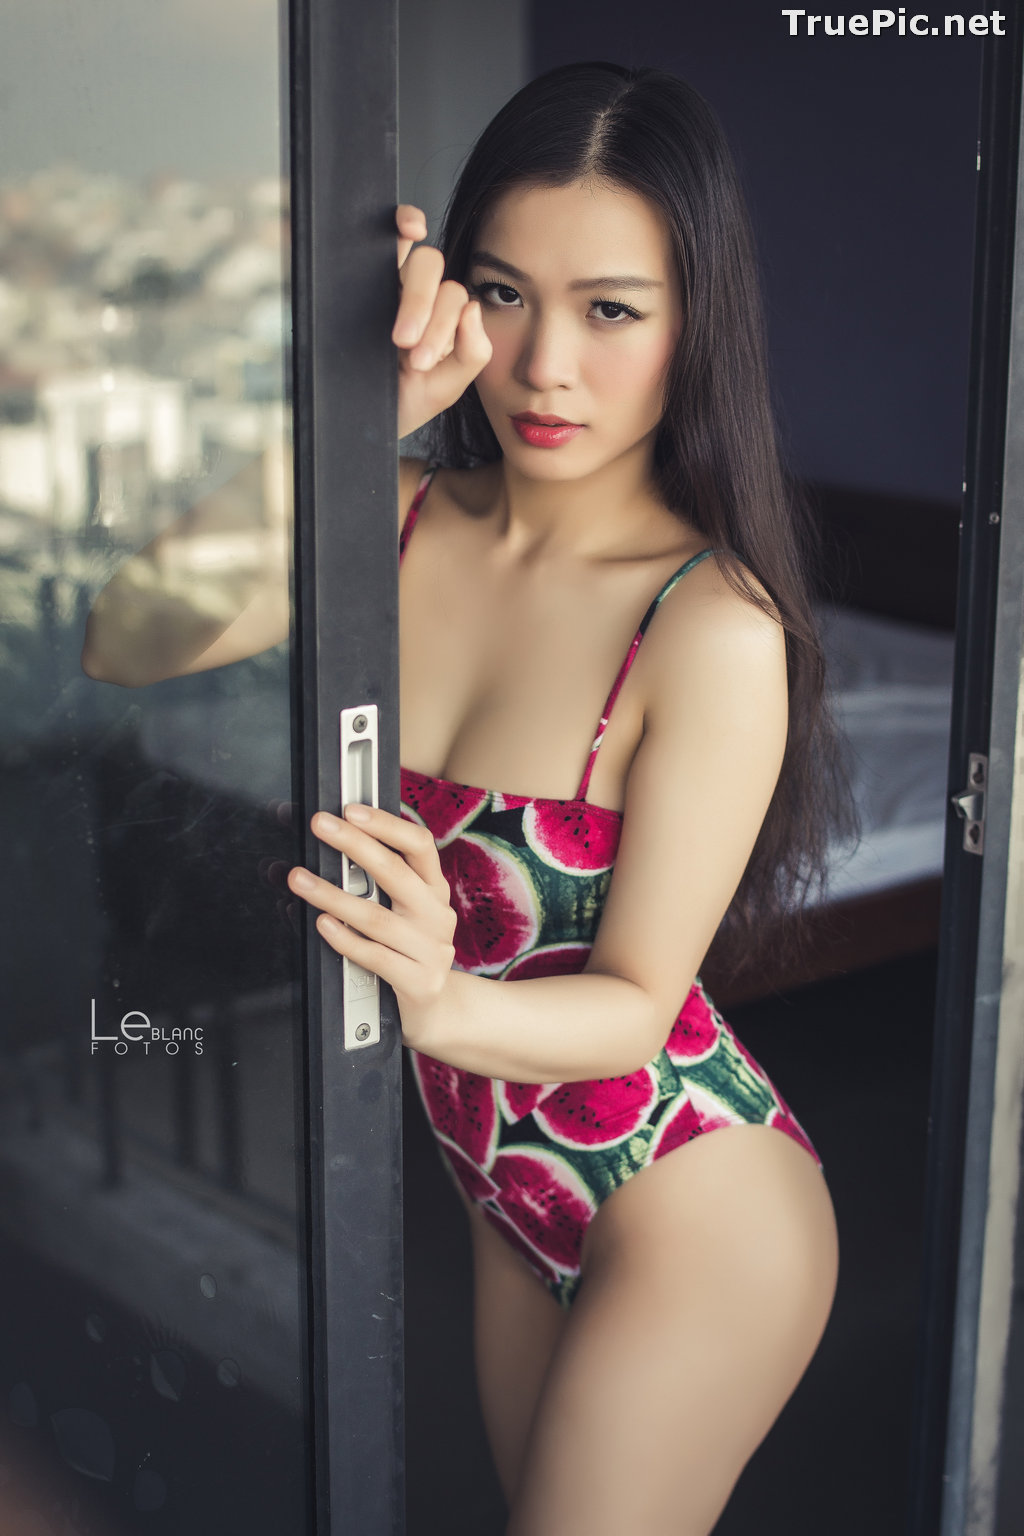 Image Vietnamese Beauties With Lingerie and Bikini – Photo by Le Blanc Studio #11 - TruePic.net - Picture-52